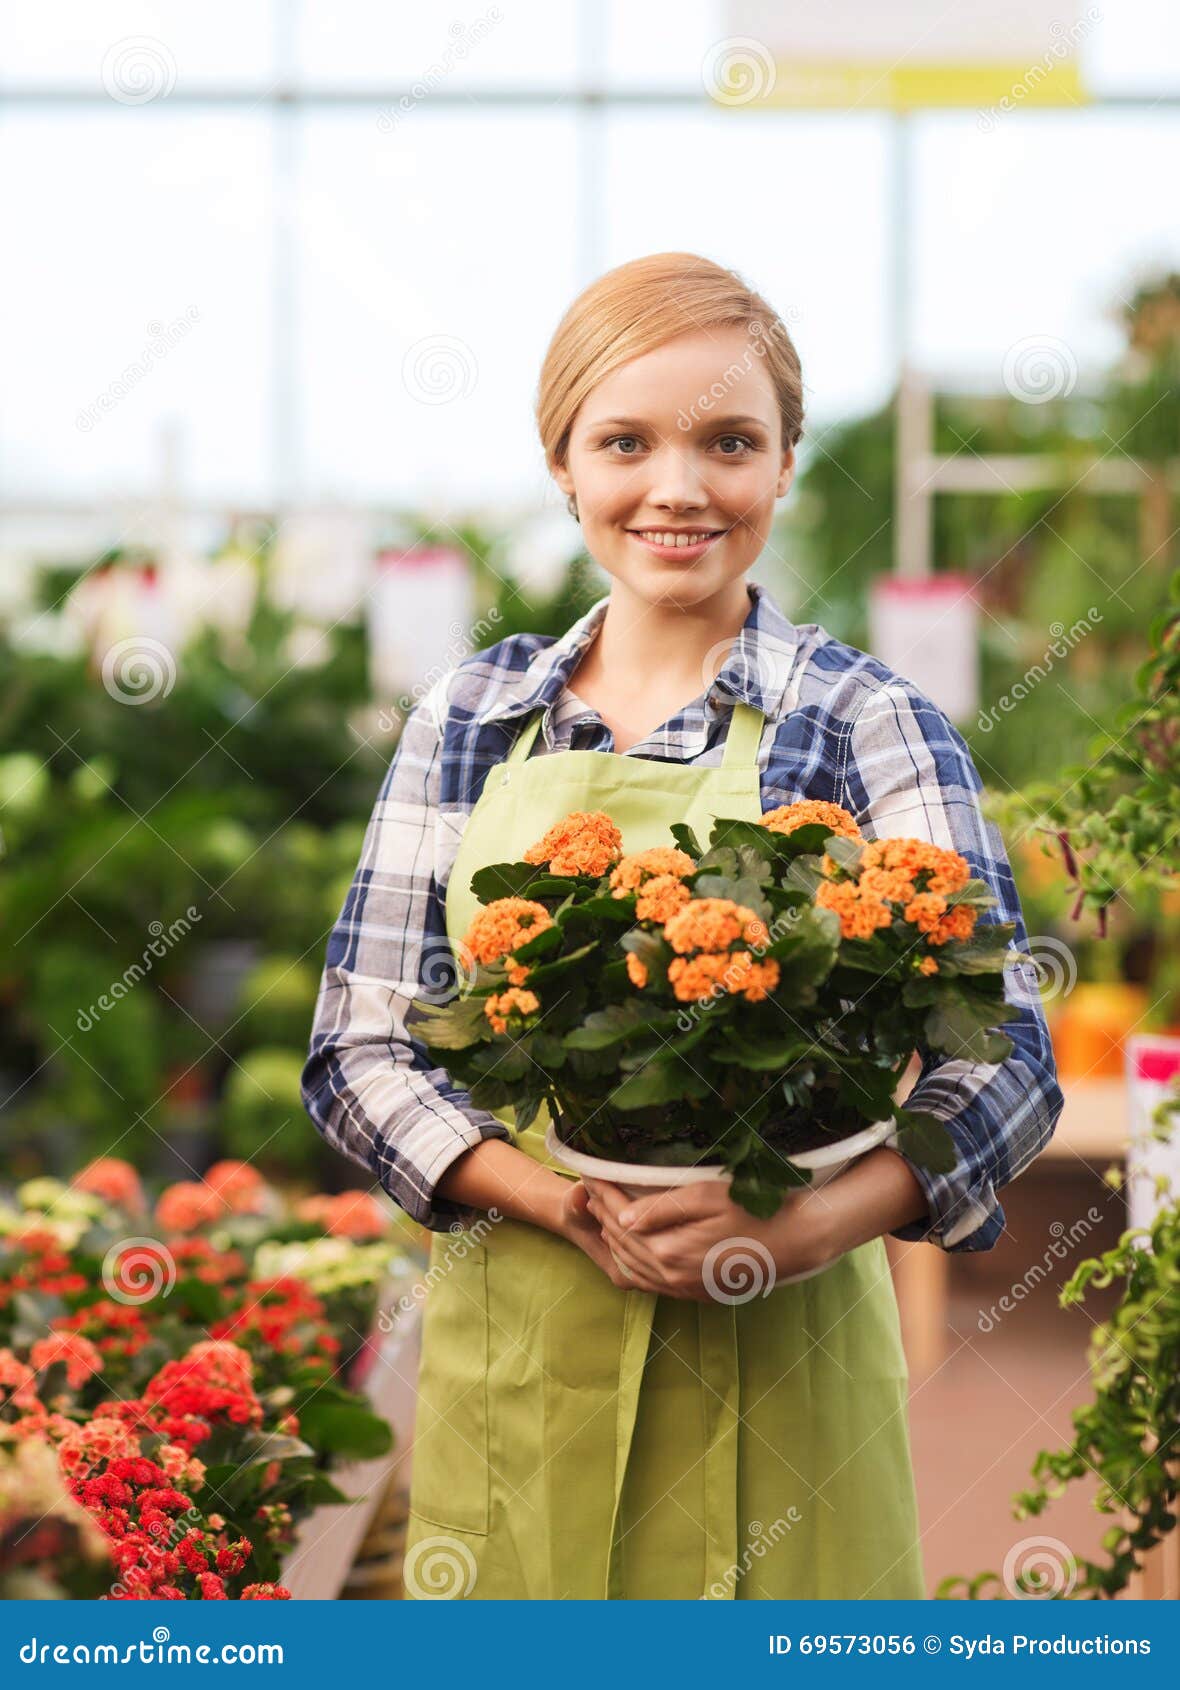 happy woman holding flowers greenhouse people gardening profession concept gardener 69573056